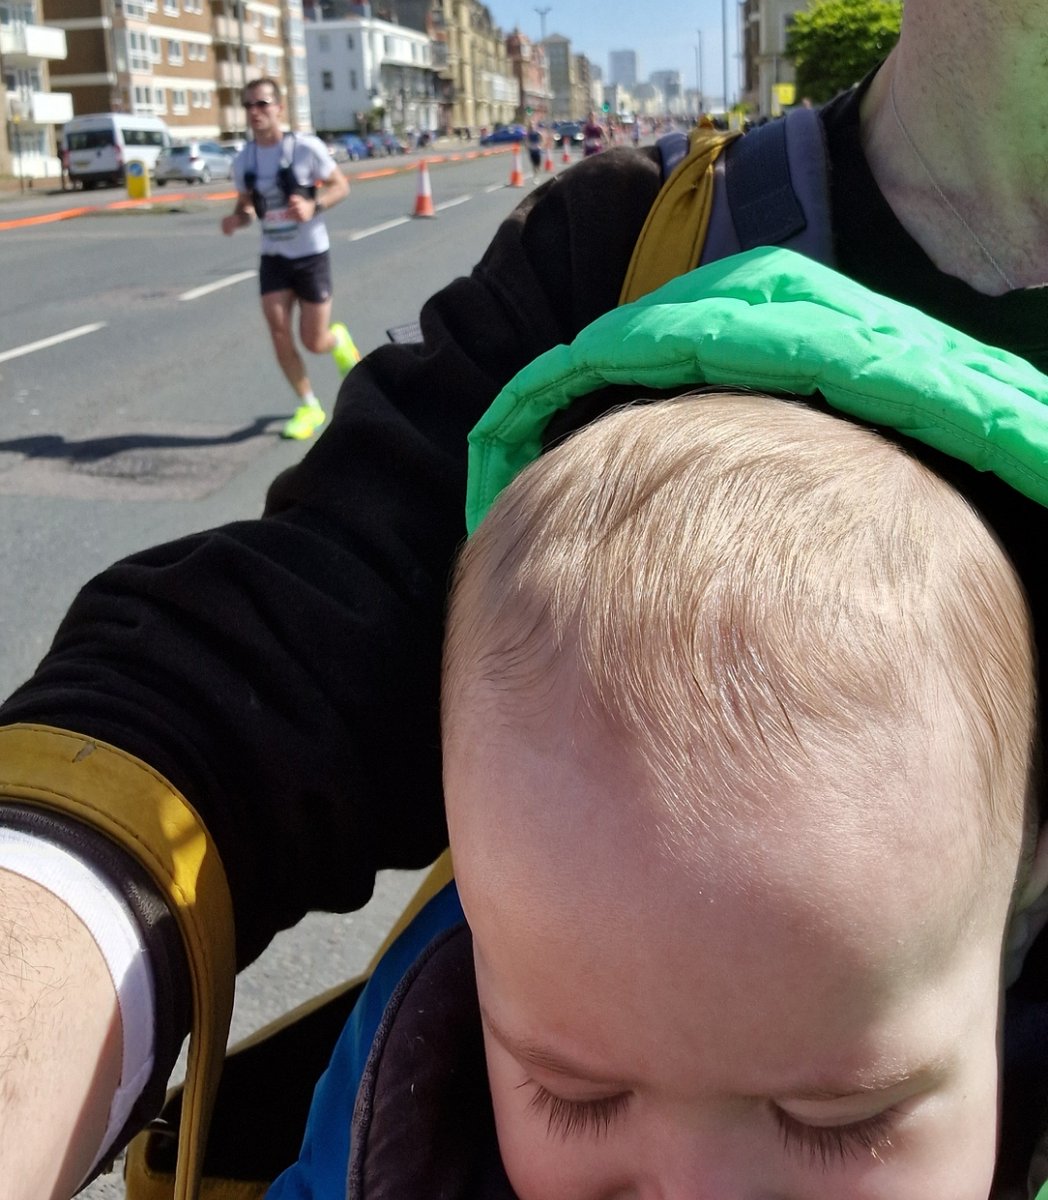 we just beat this guy to win the Brighton Marathon, cant believe we actually did it! #sportstrivia #fact #brightonmarathon